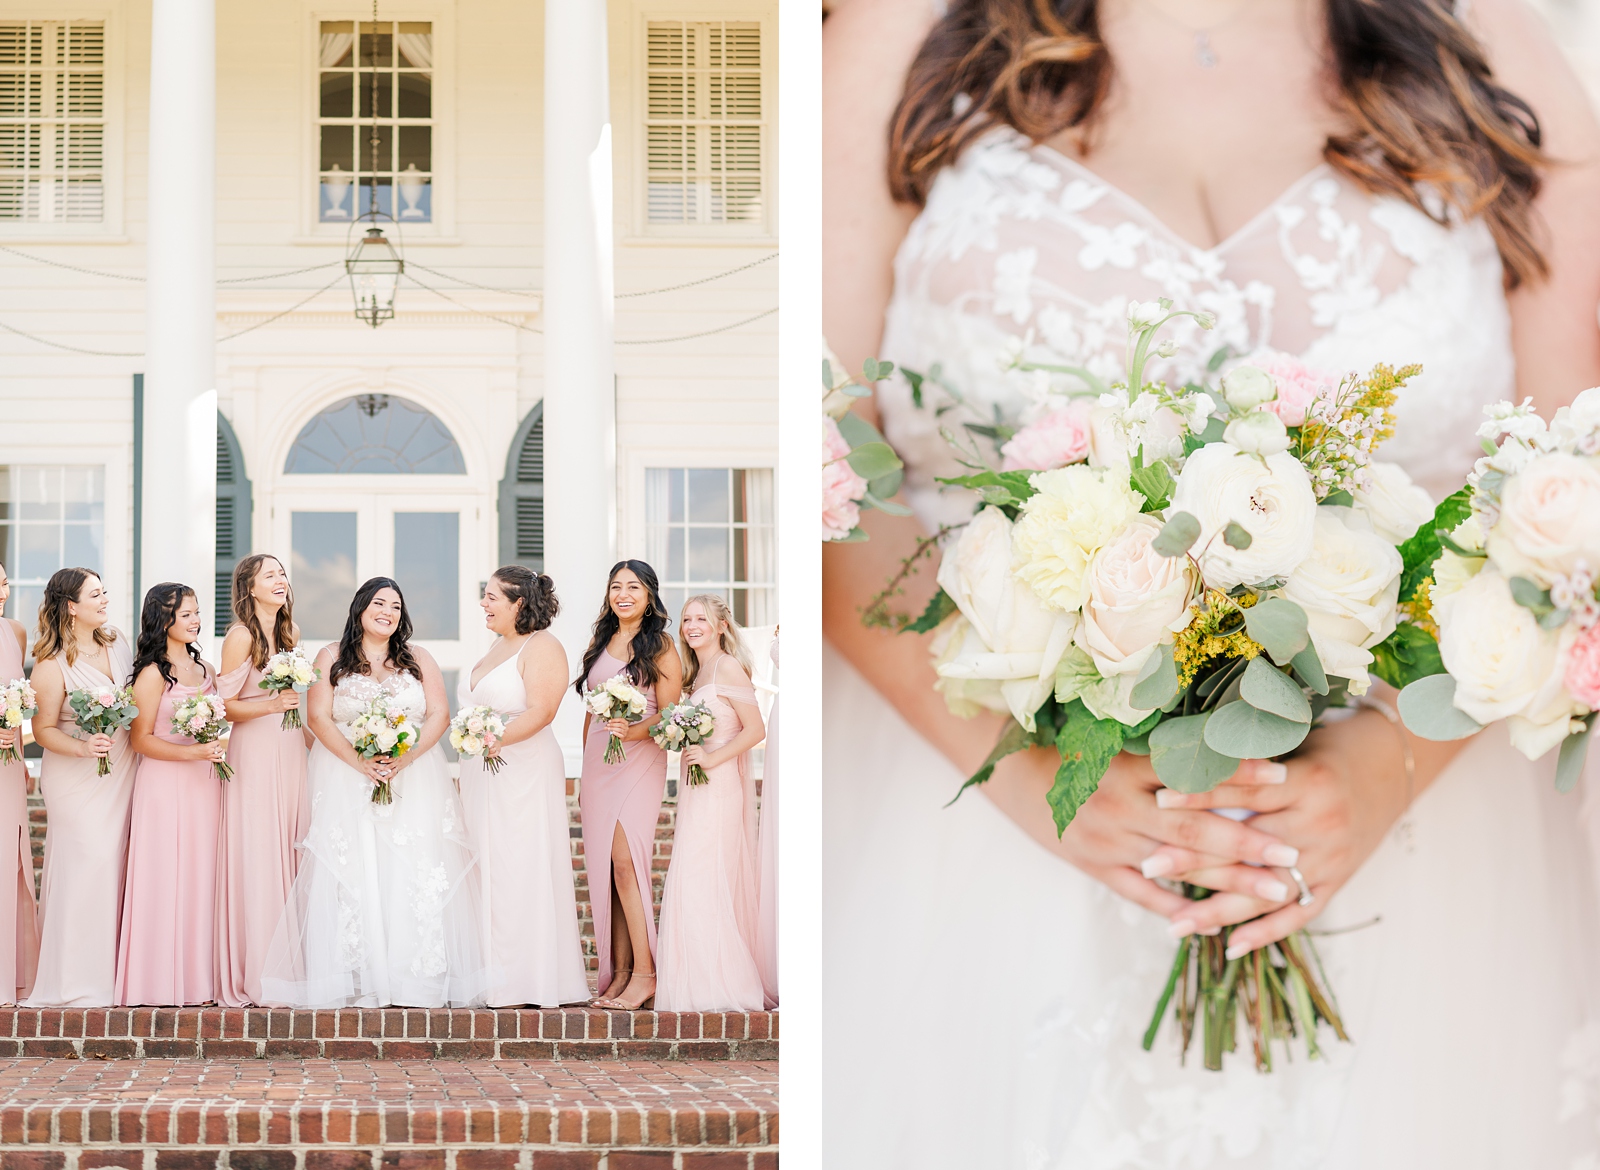 Bride and Bridesmaid Portraits at a Cumberland Estate Wedding with Pink Bridesmaid Dresses. Photography by New Kent Wedding Photographer Kailey Brianne Photography. 